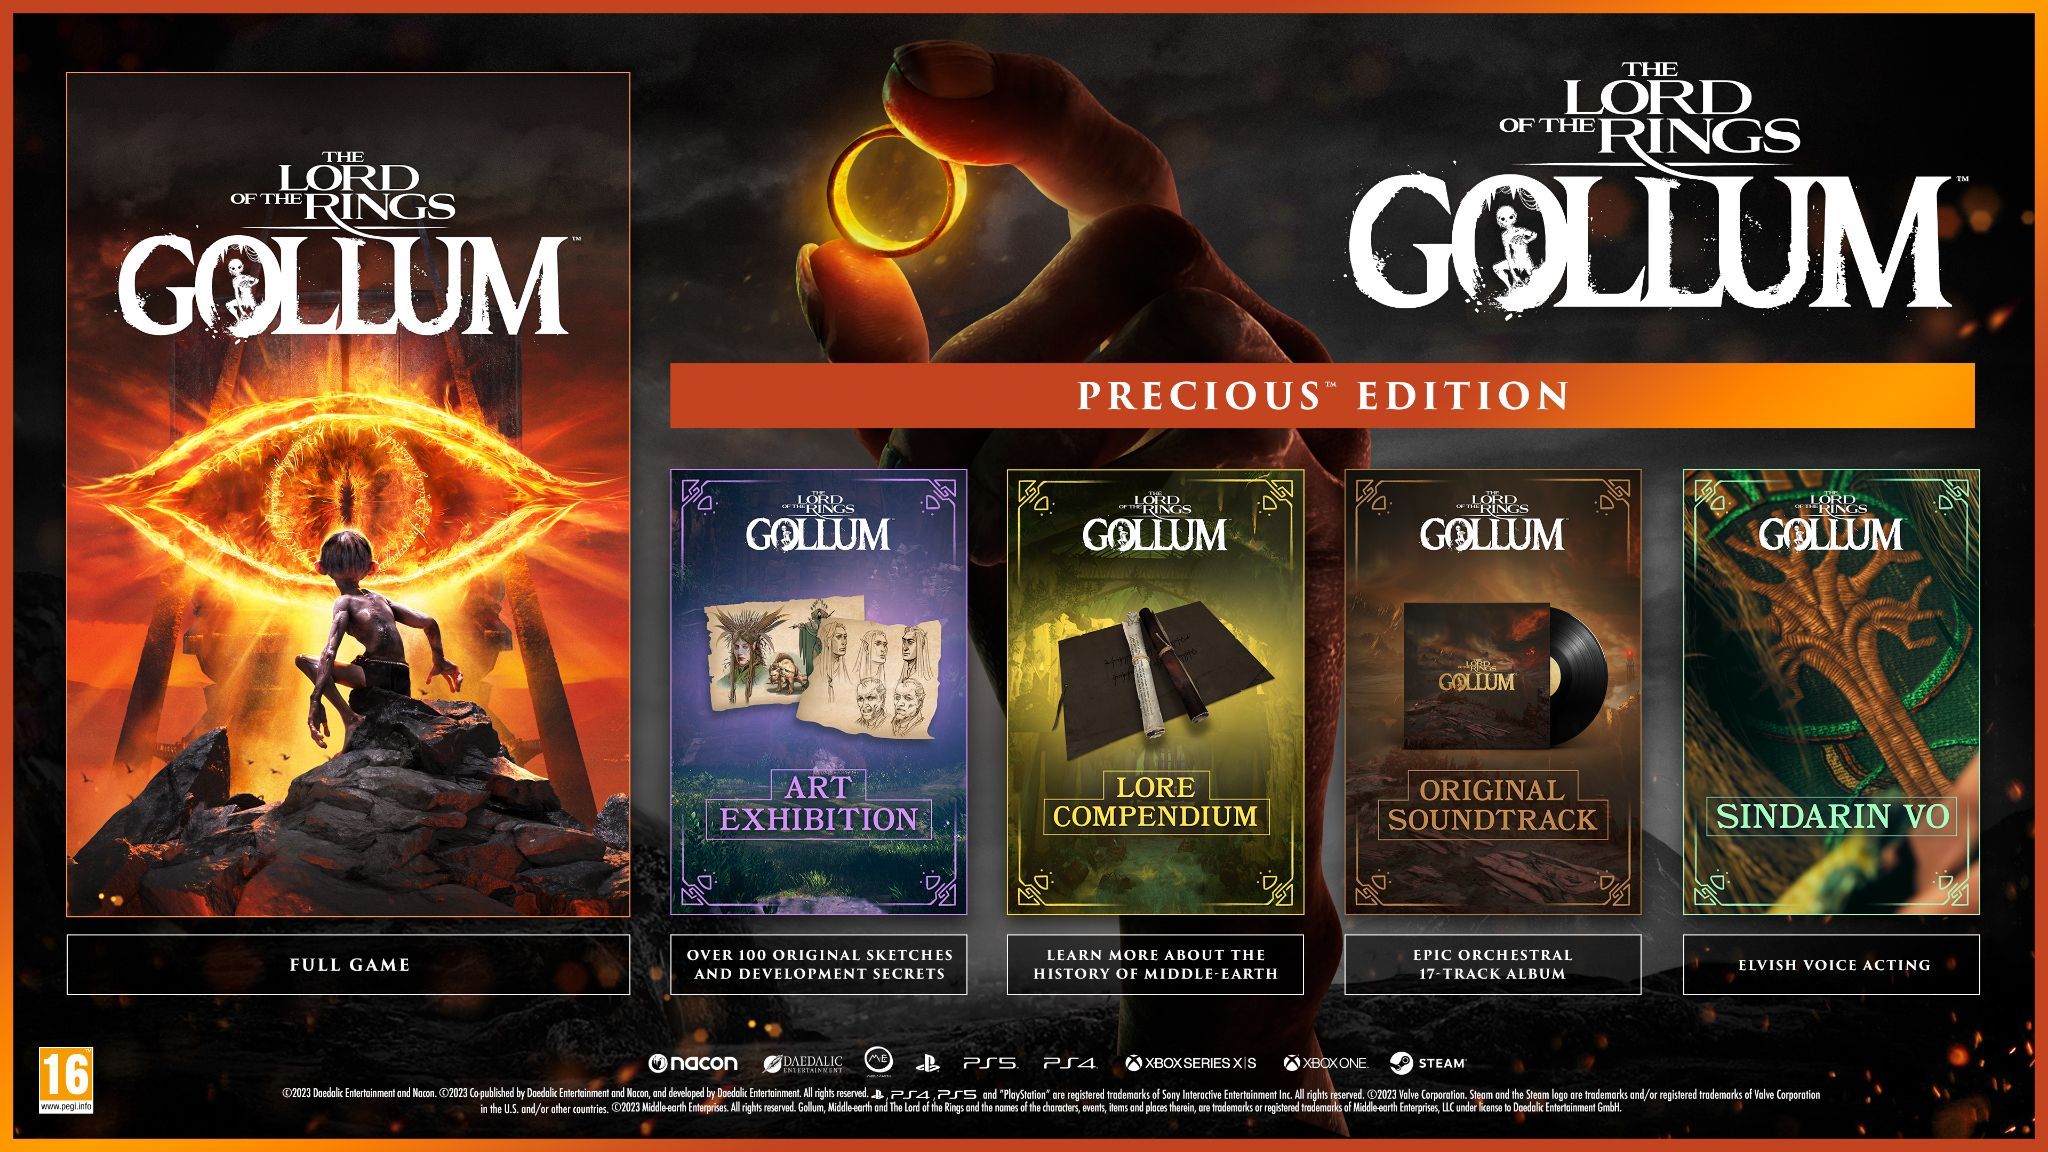 A graphic outlining what you'll get in The Lord of the Rings: Gollum: Precious Edition.Includes full game, art exhibition, lore collection, original soundtrack, and Sindarin voice acting